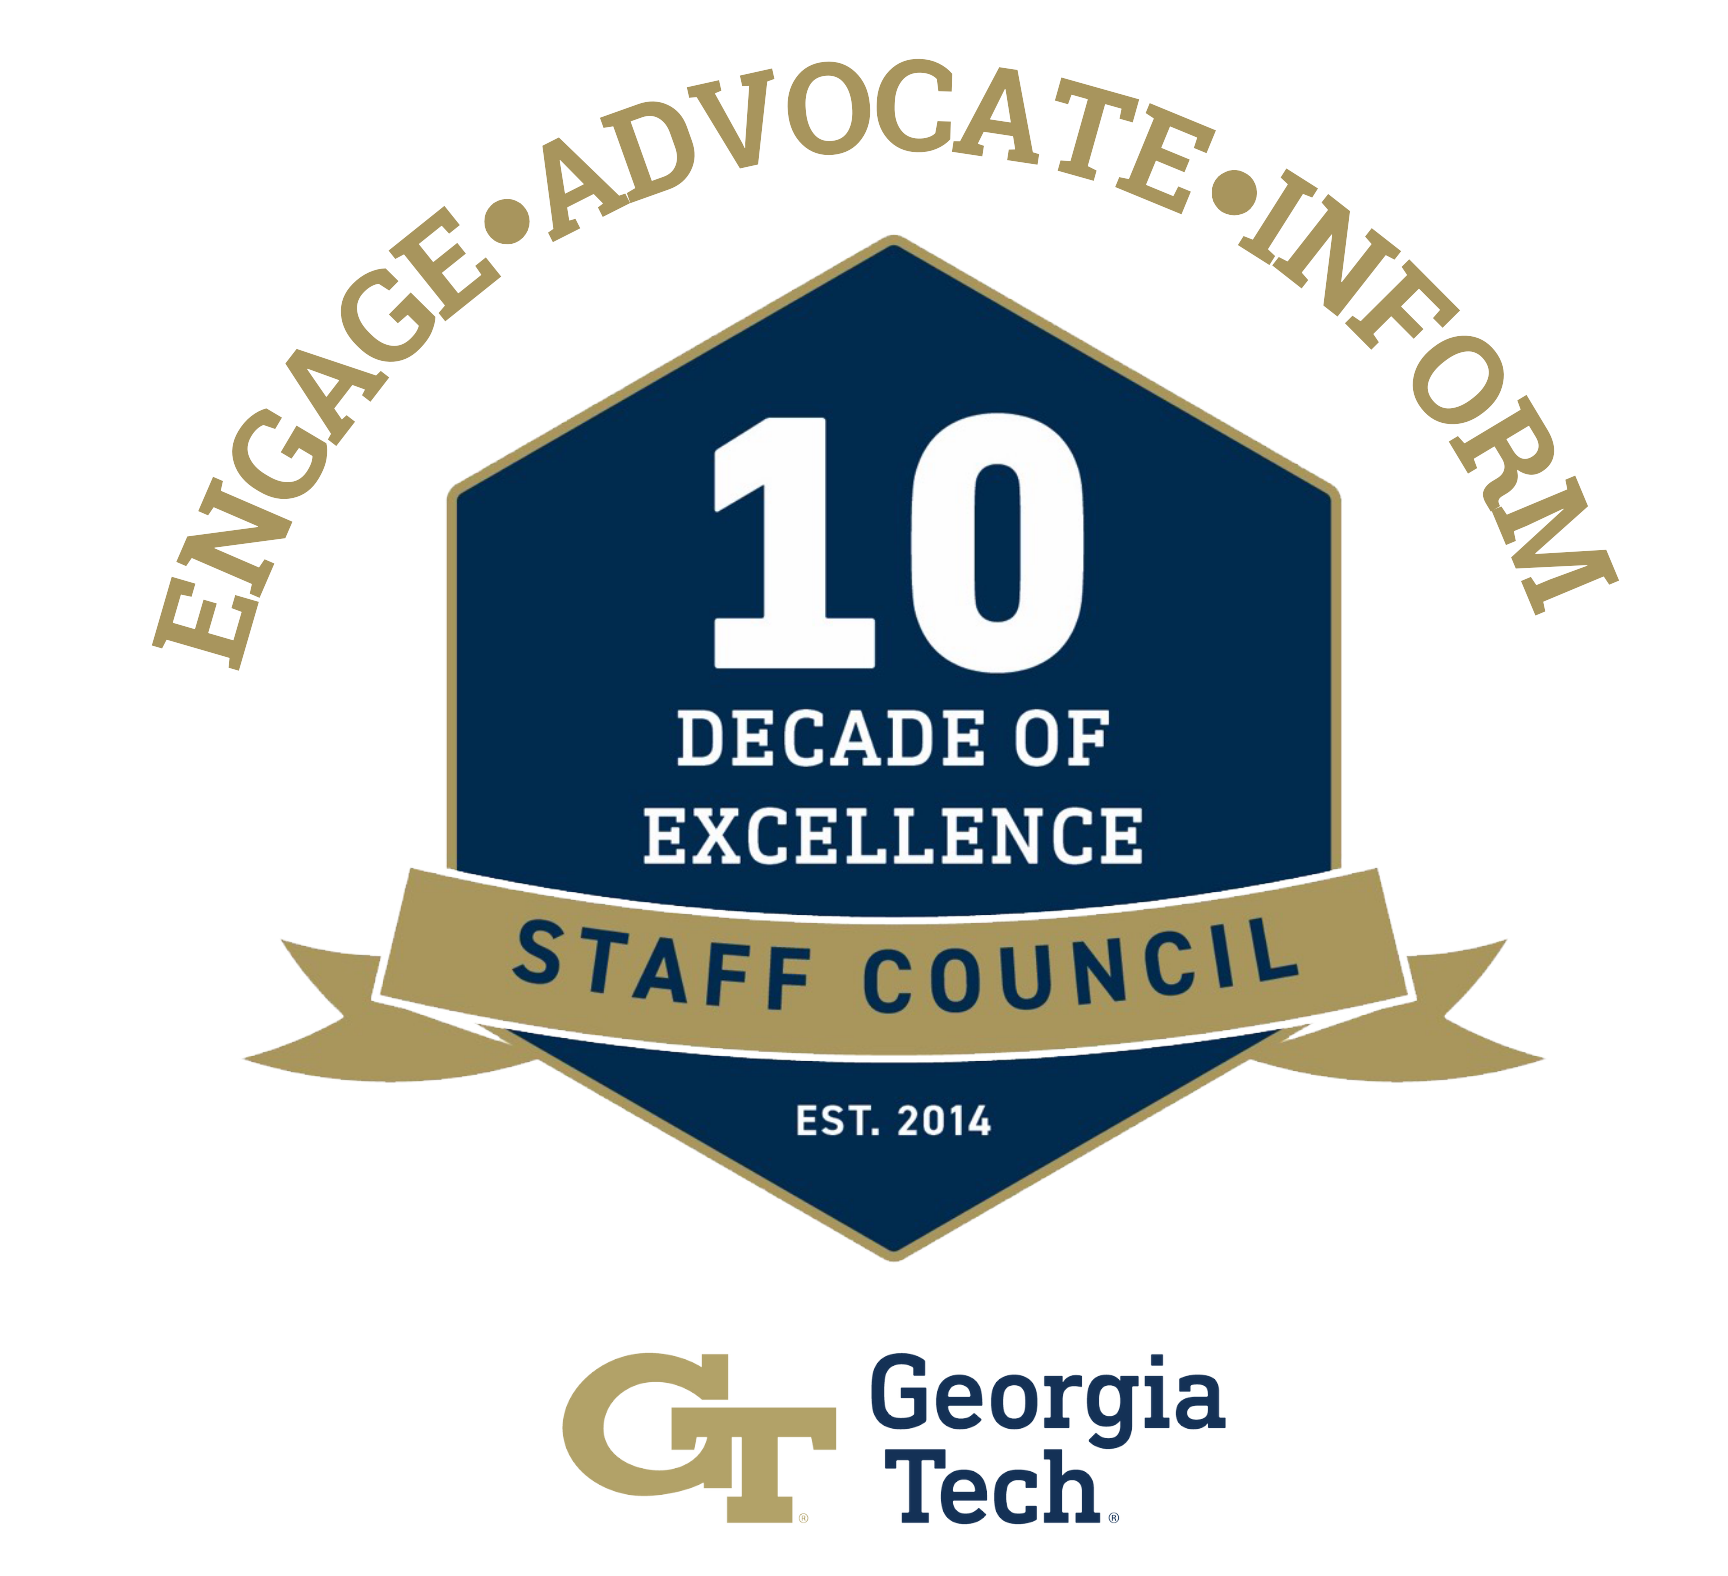 Staff Council - A Decade of Excellence